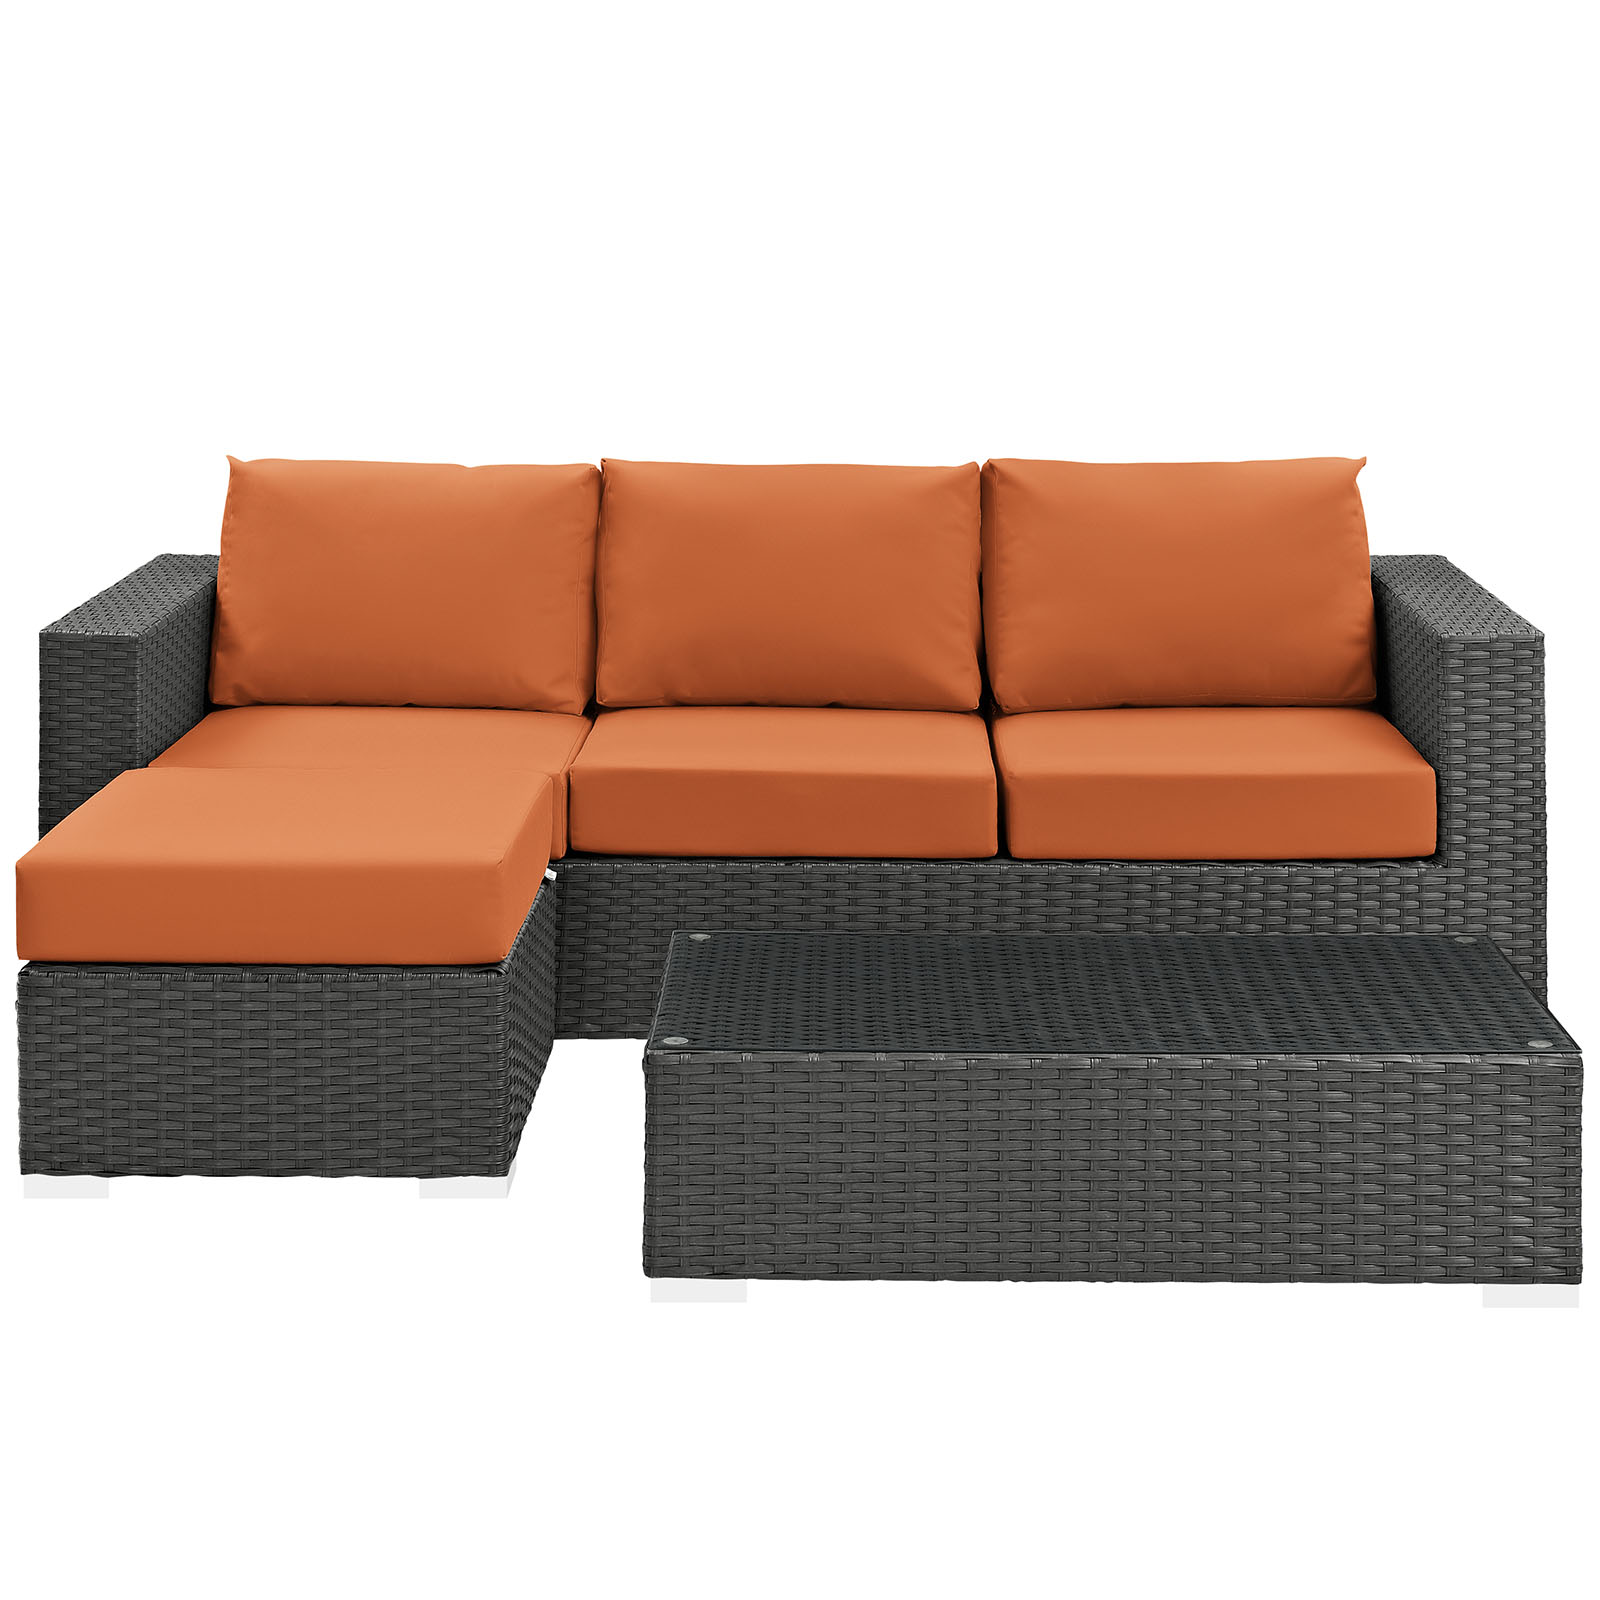 Modway Sojourn 3 Piece Outdoor Patio Sunbrella? Sectional Set in Canvas Tuscan - image 4 of 7